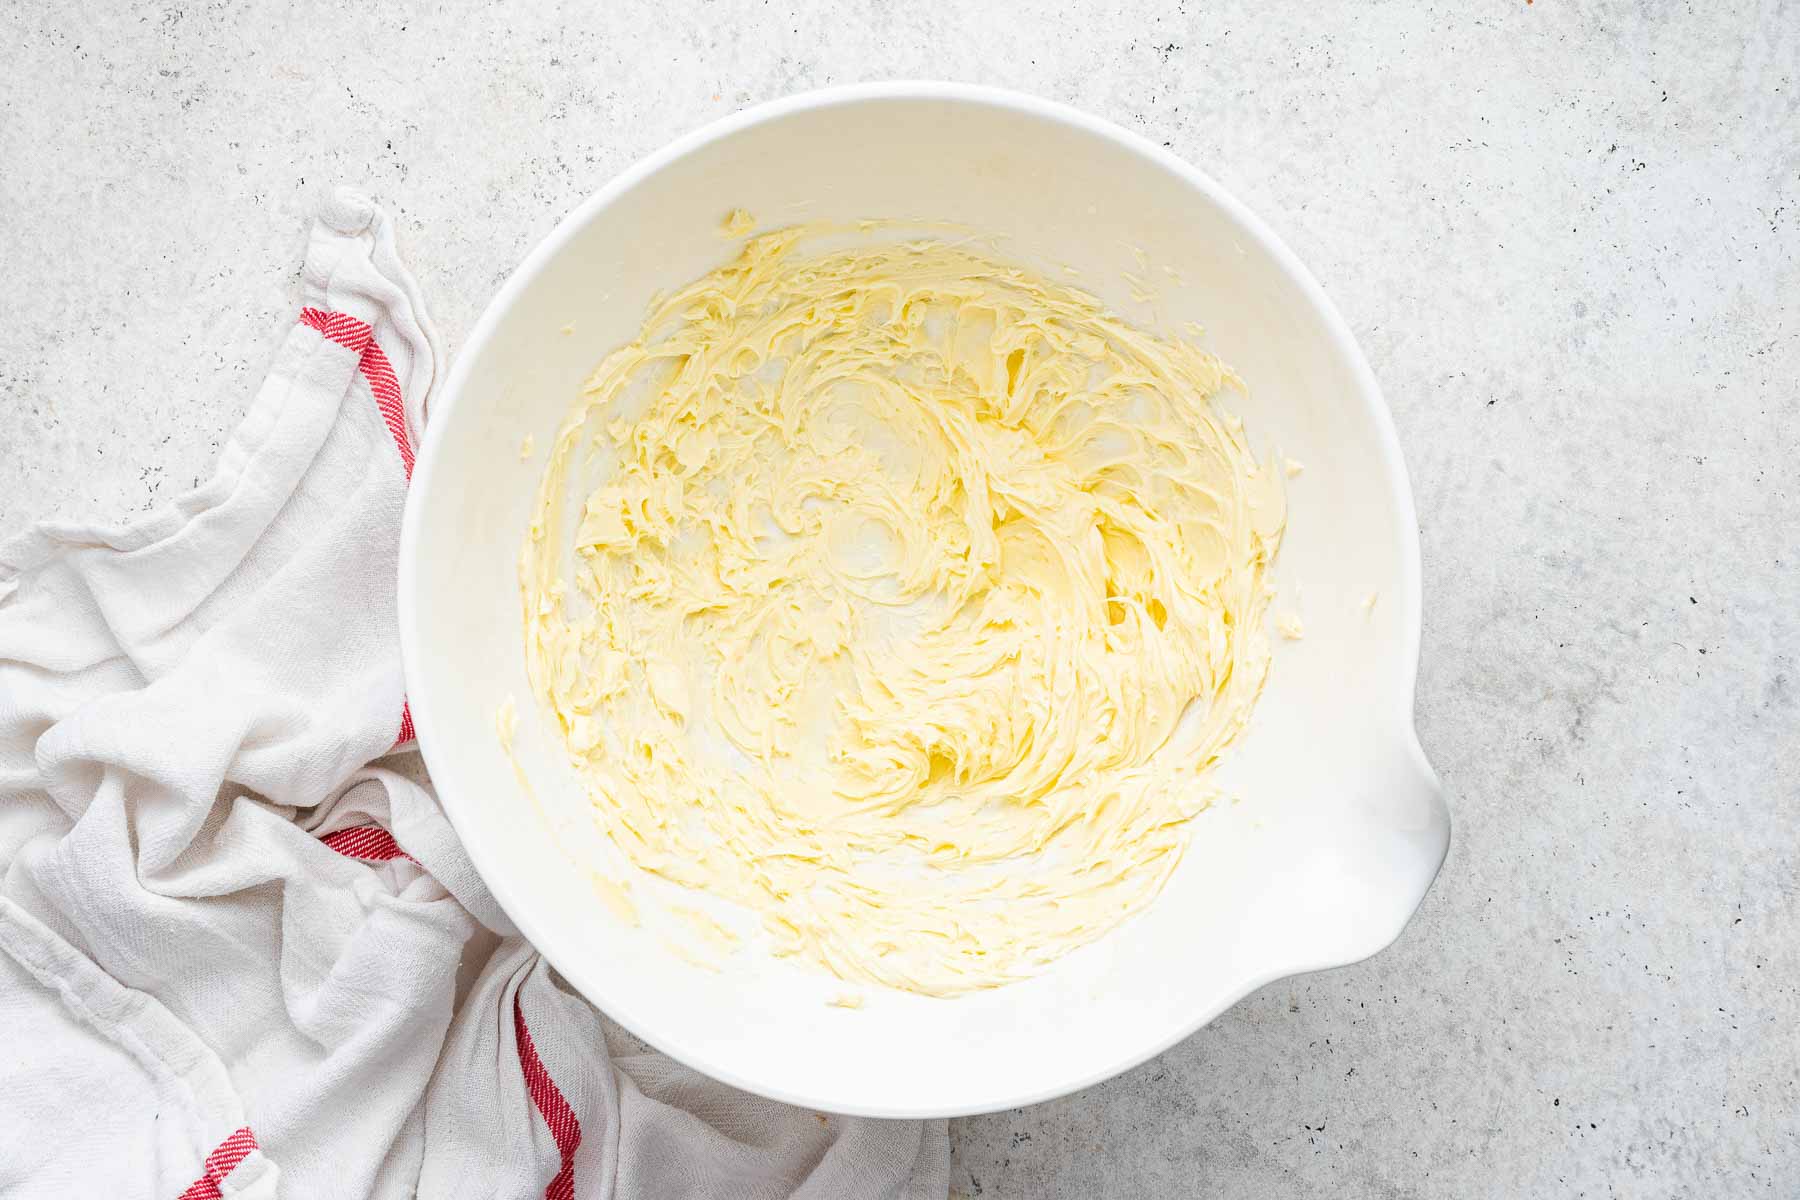 Butter, beaten until fluffy in a white bowl.